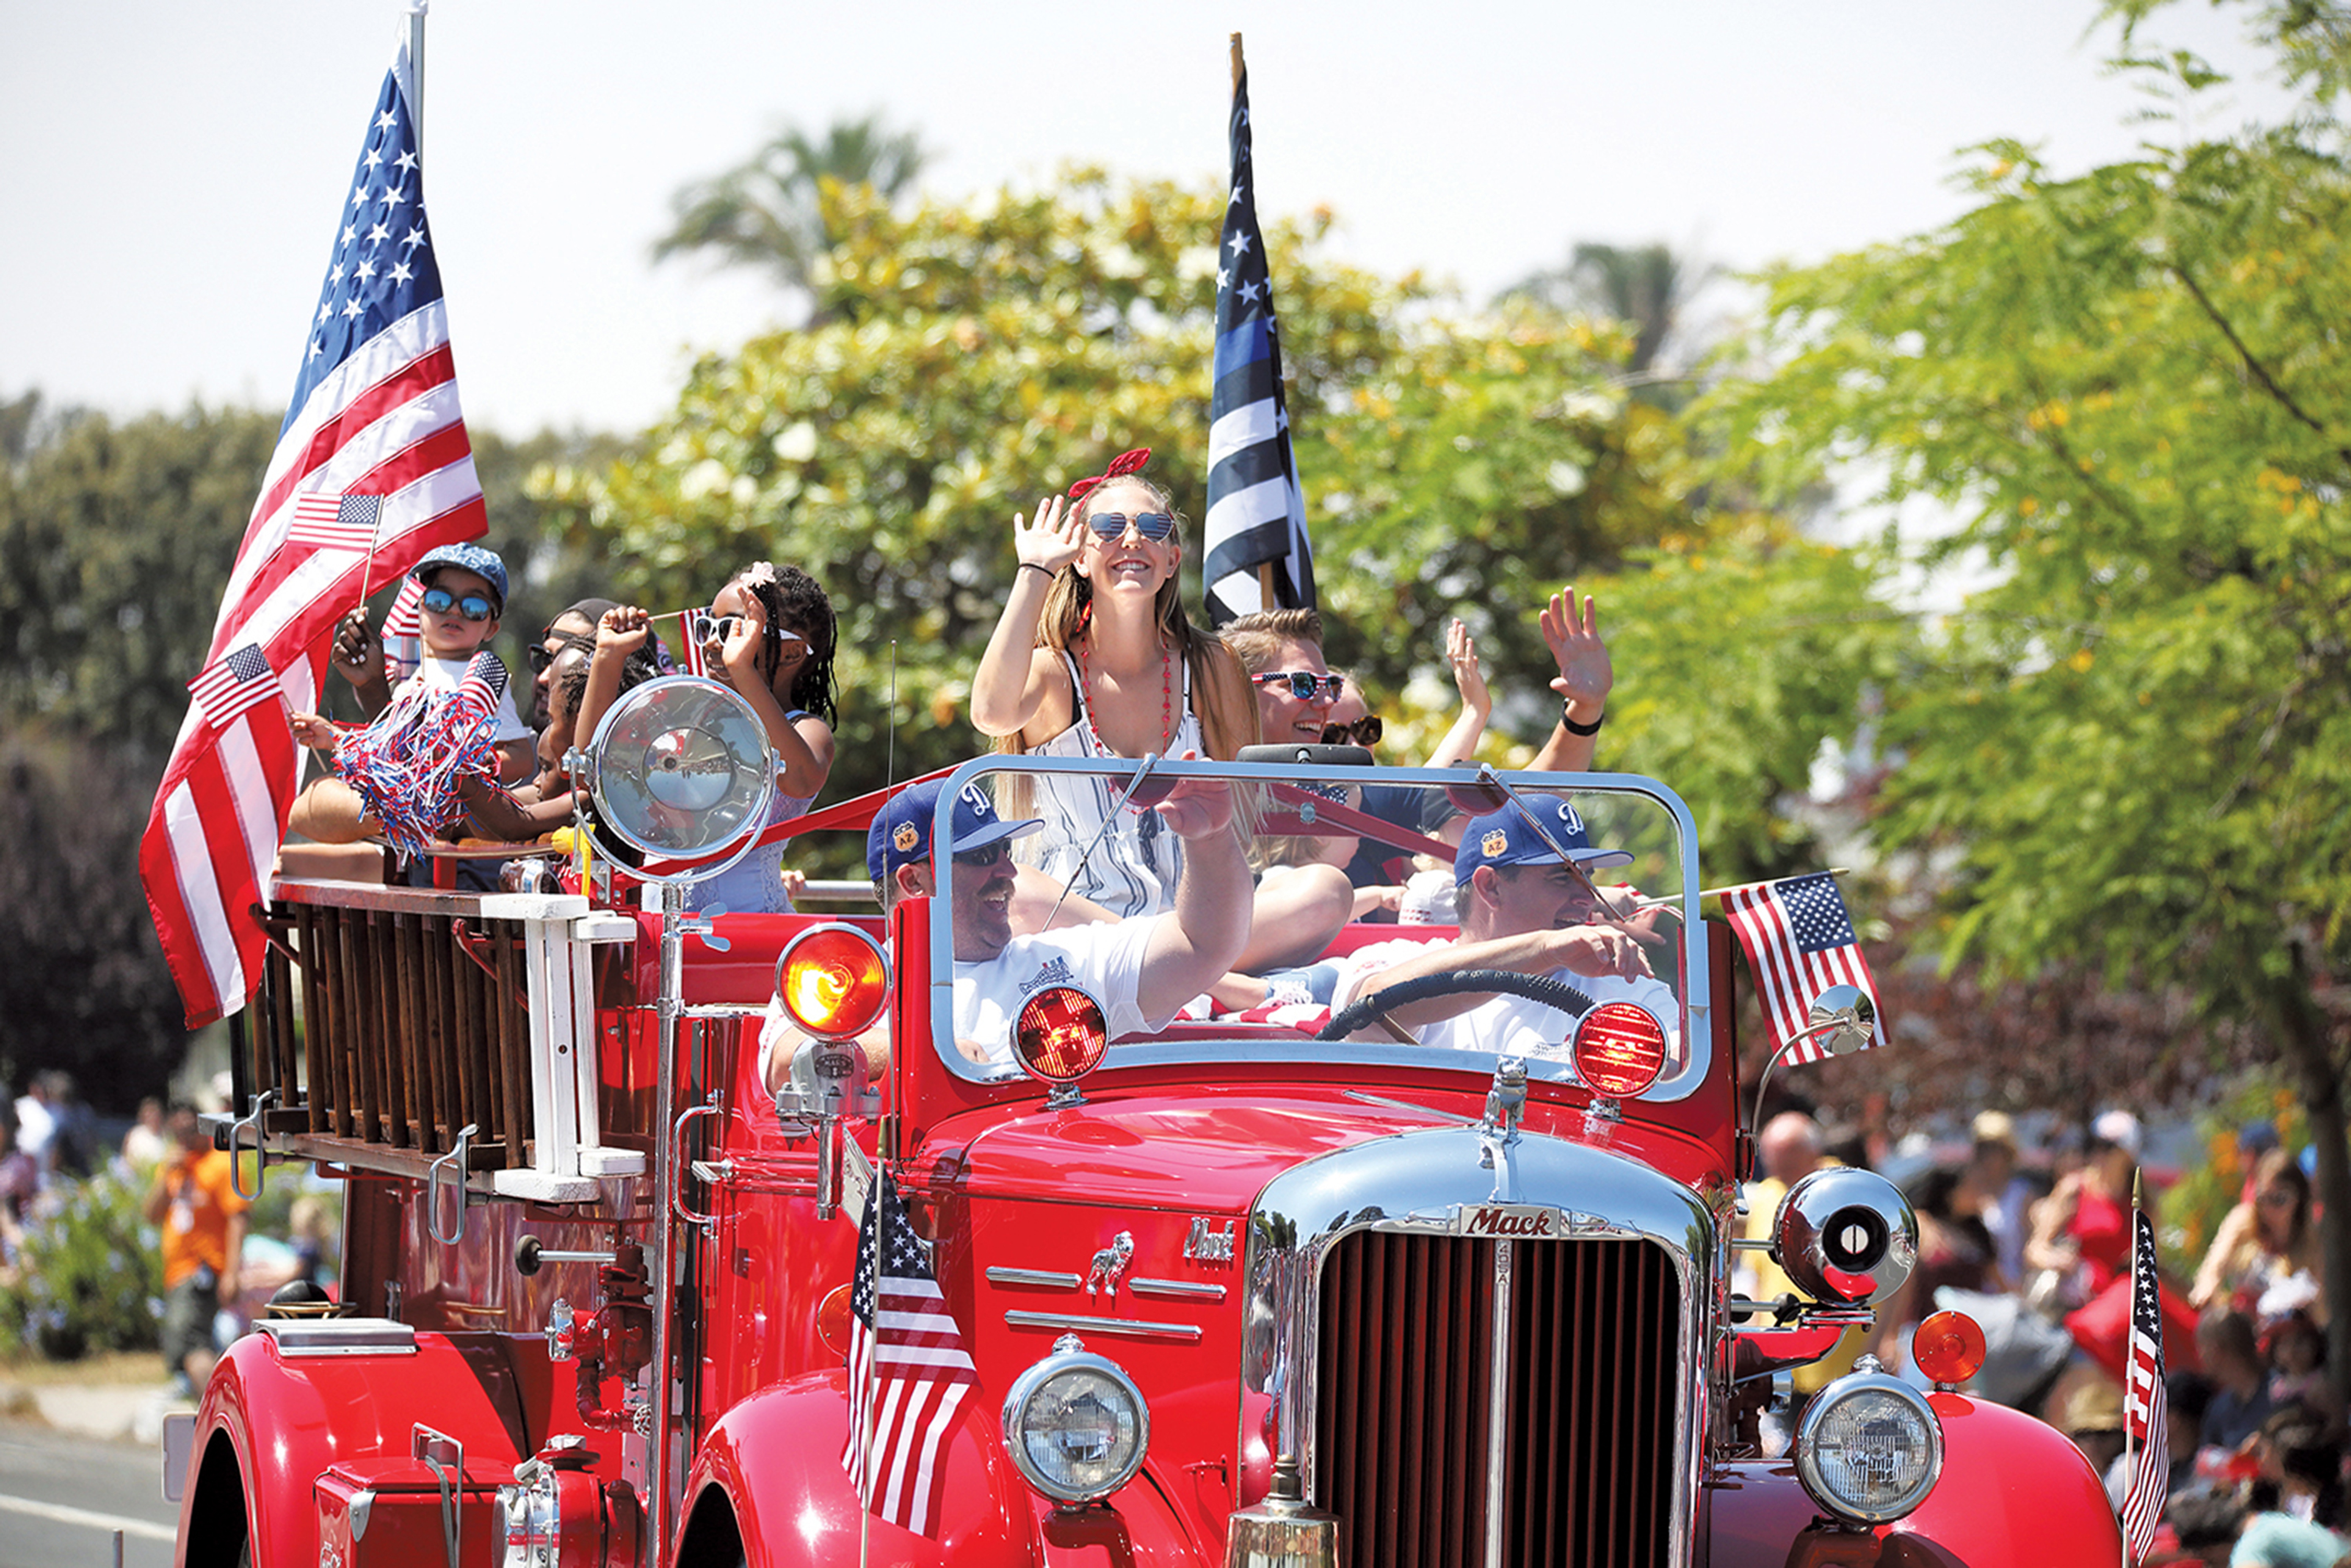 Calling all community support for the Fourth of July Parade!